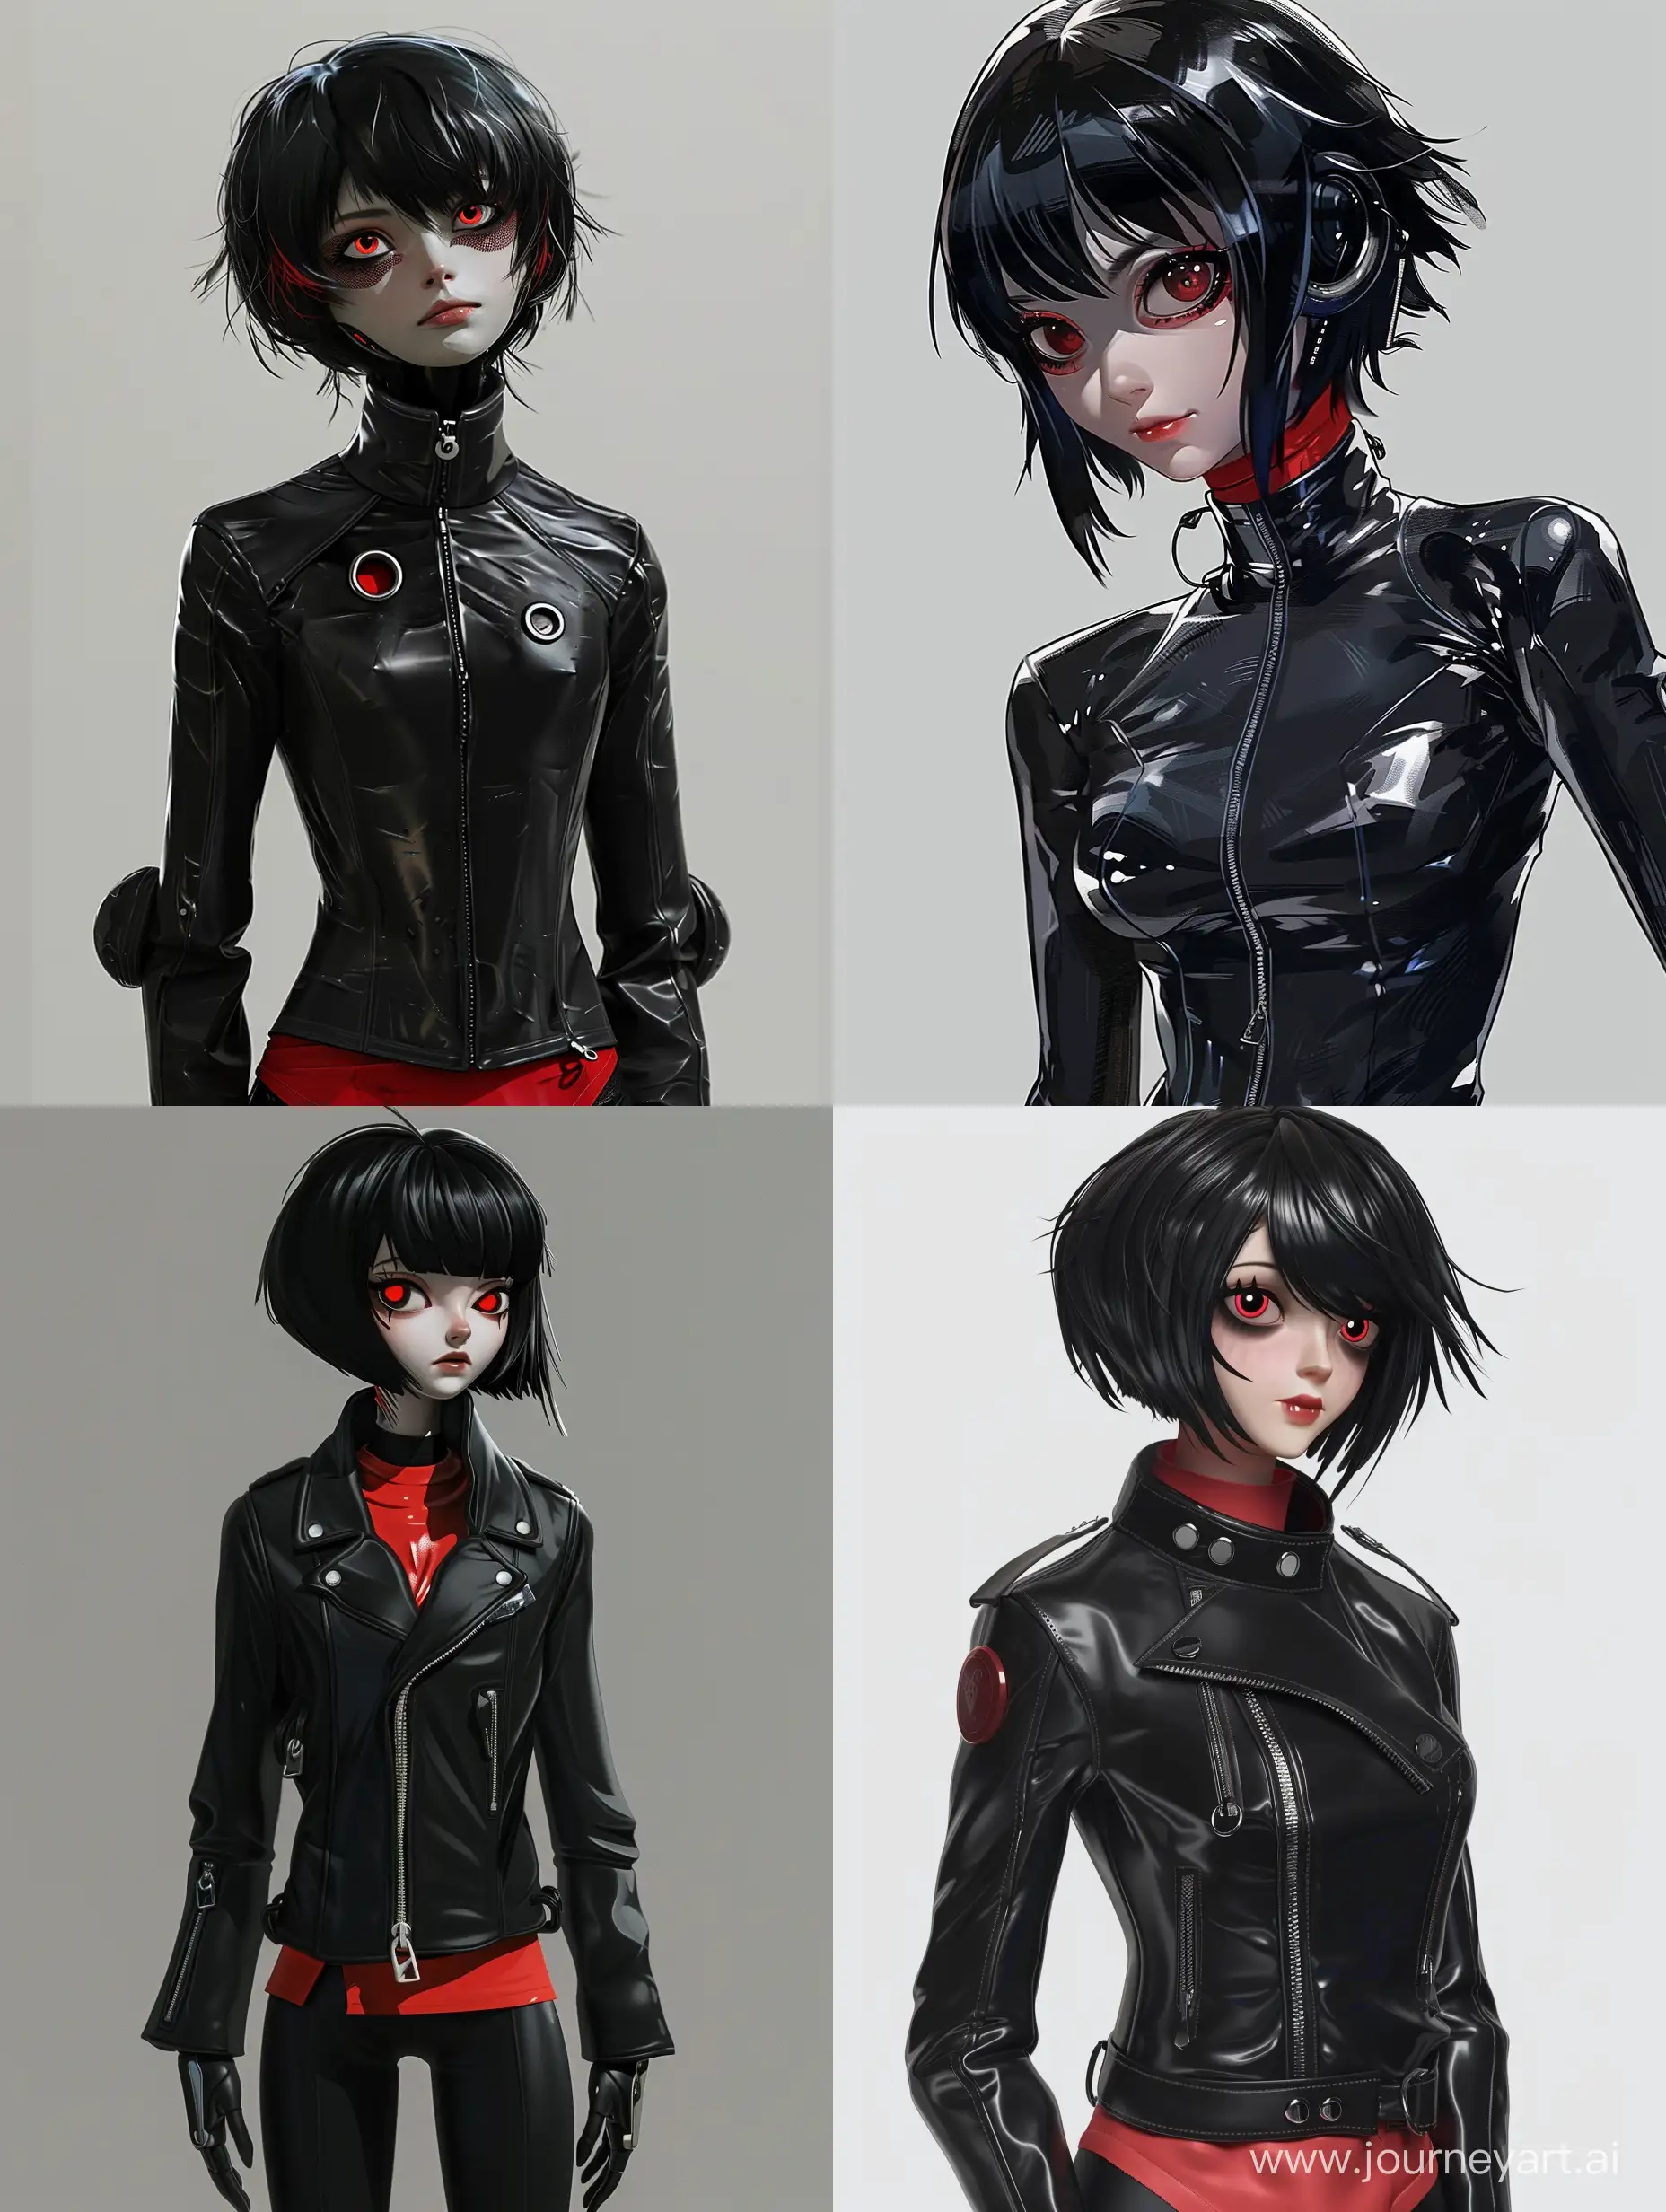 Edgy-Cartoon-Android-Girl-with-Black-Plastic-Skin-and-Red-Anime-Eyes